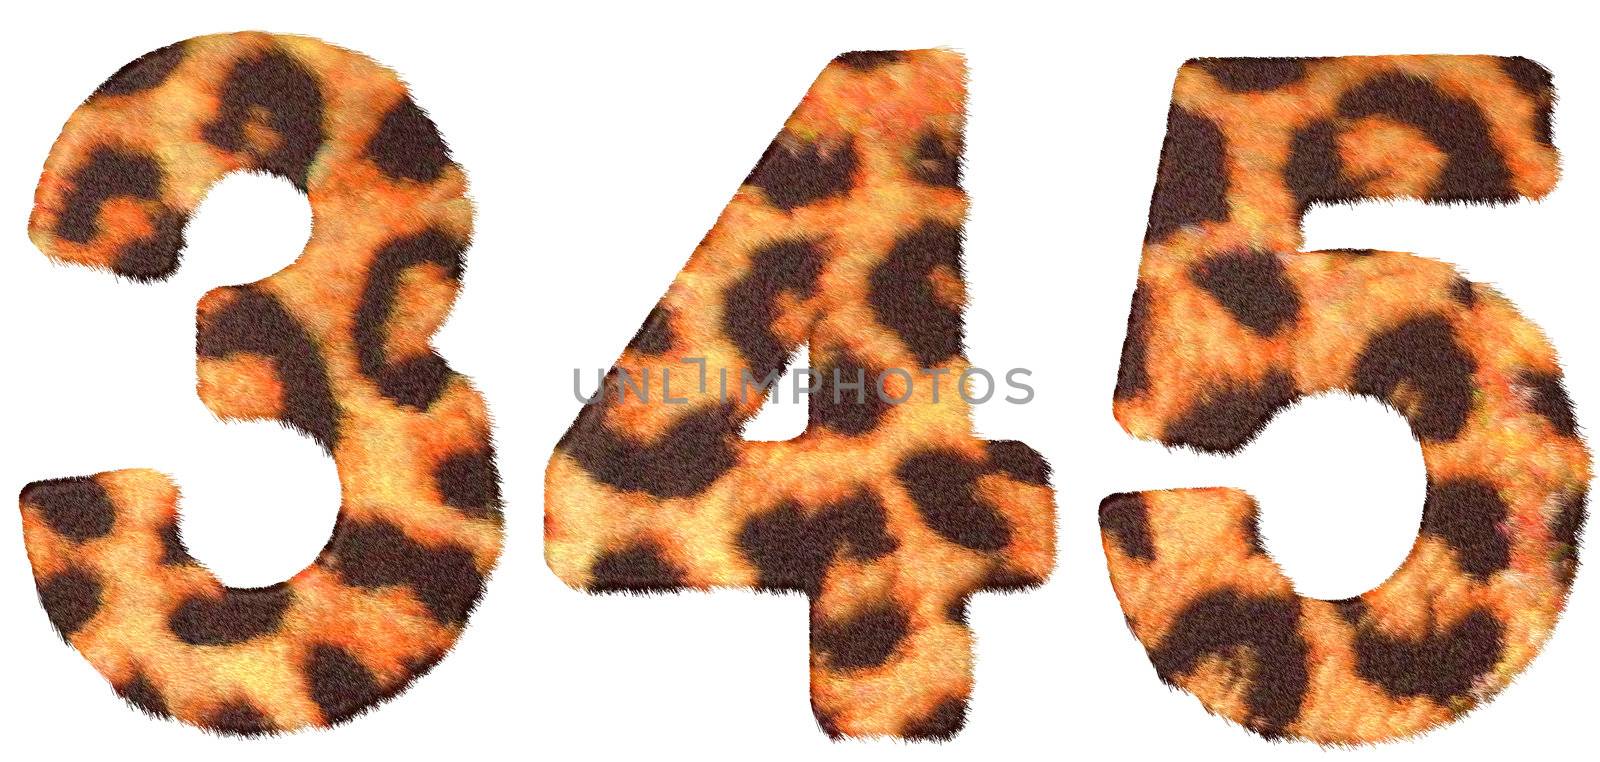 Leopard skin 3 4 and 5 figures isolated over white